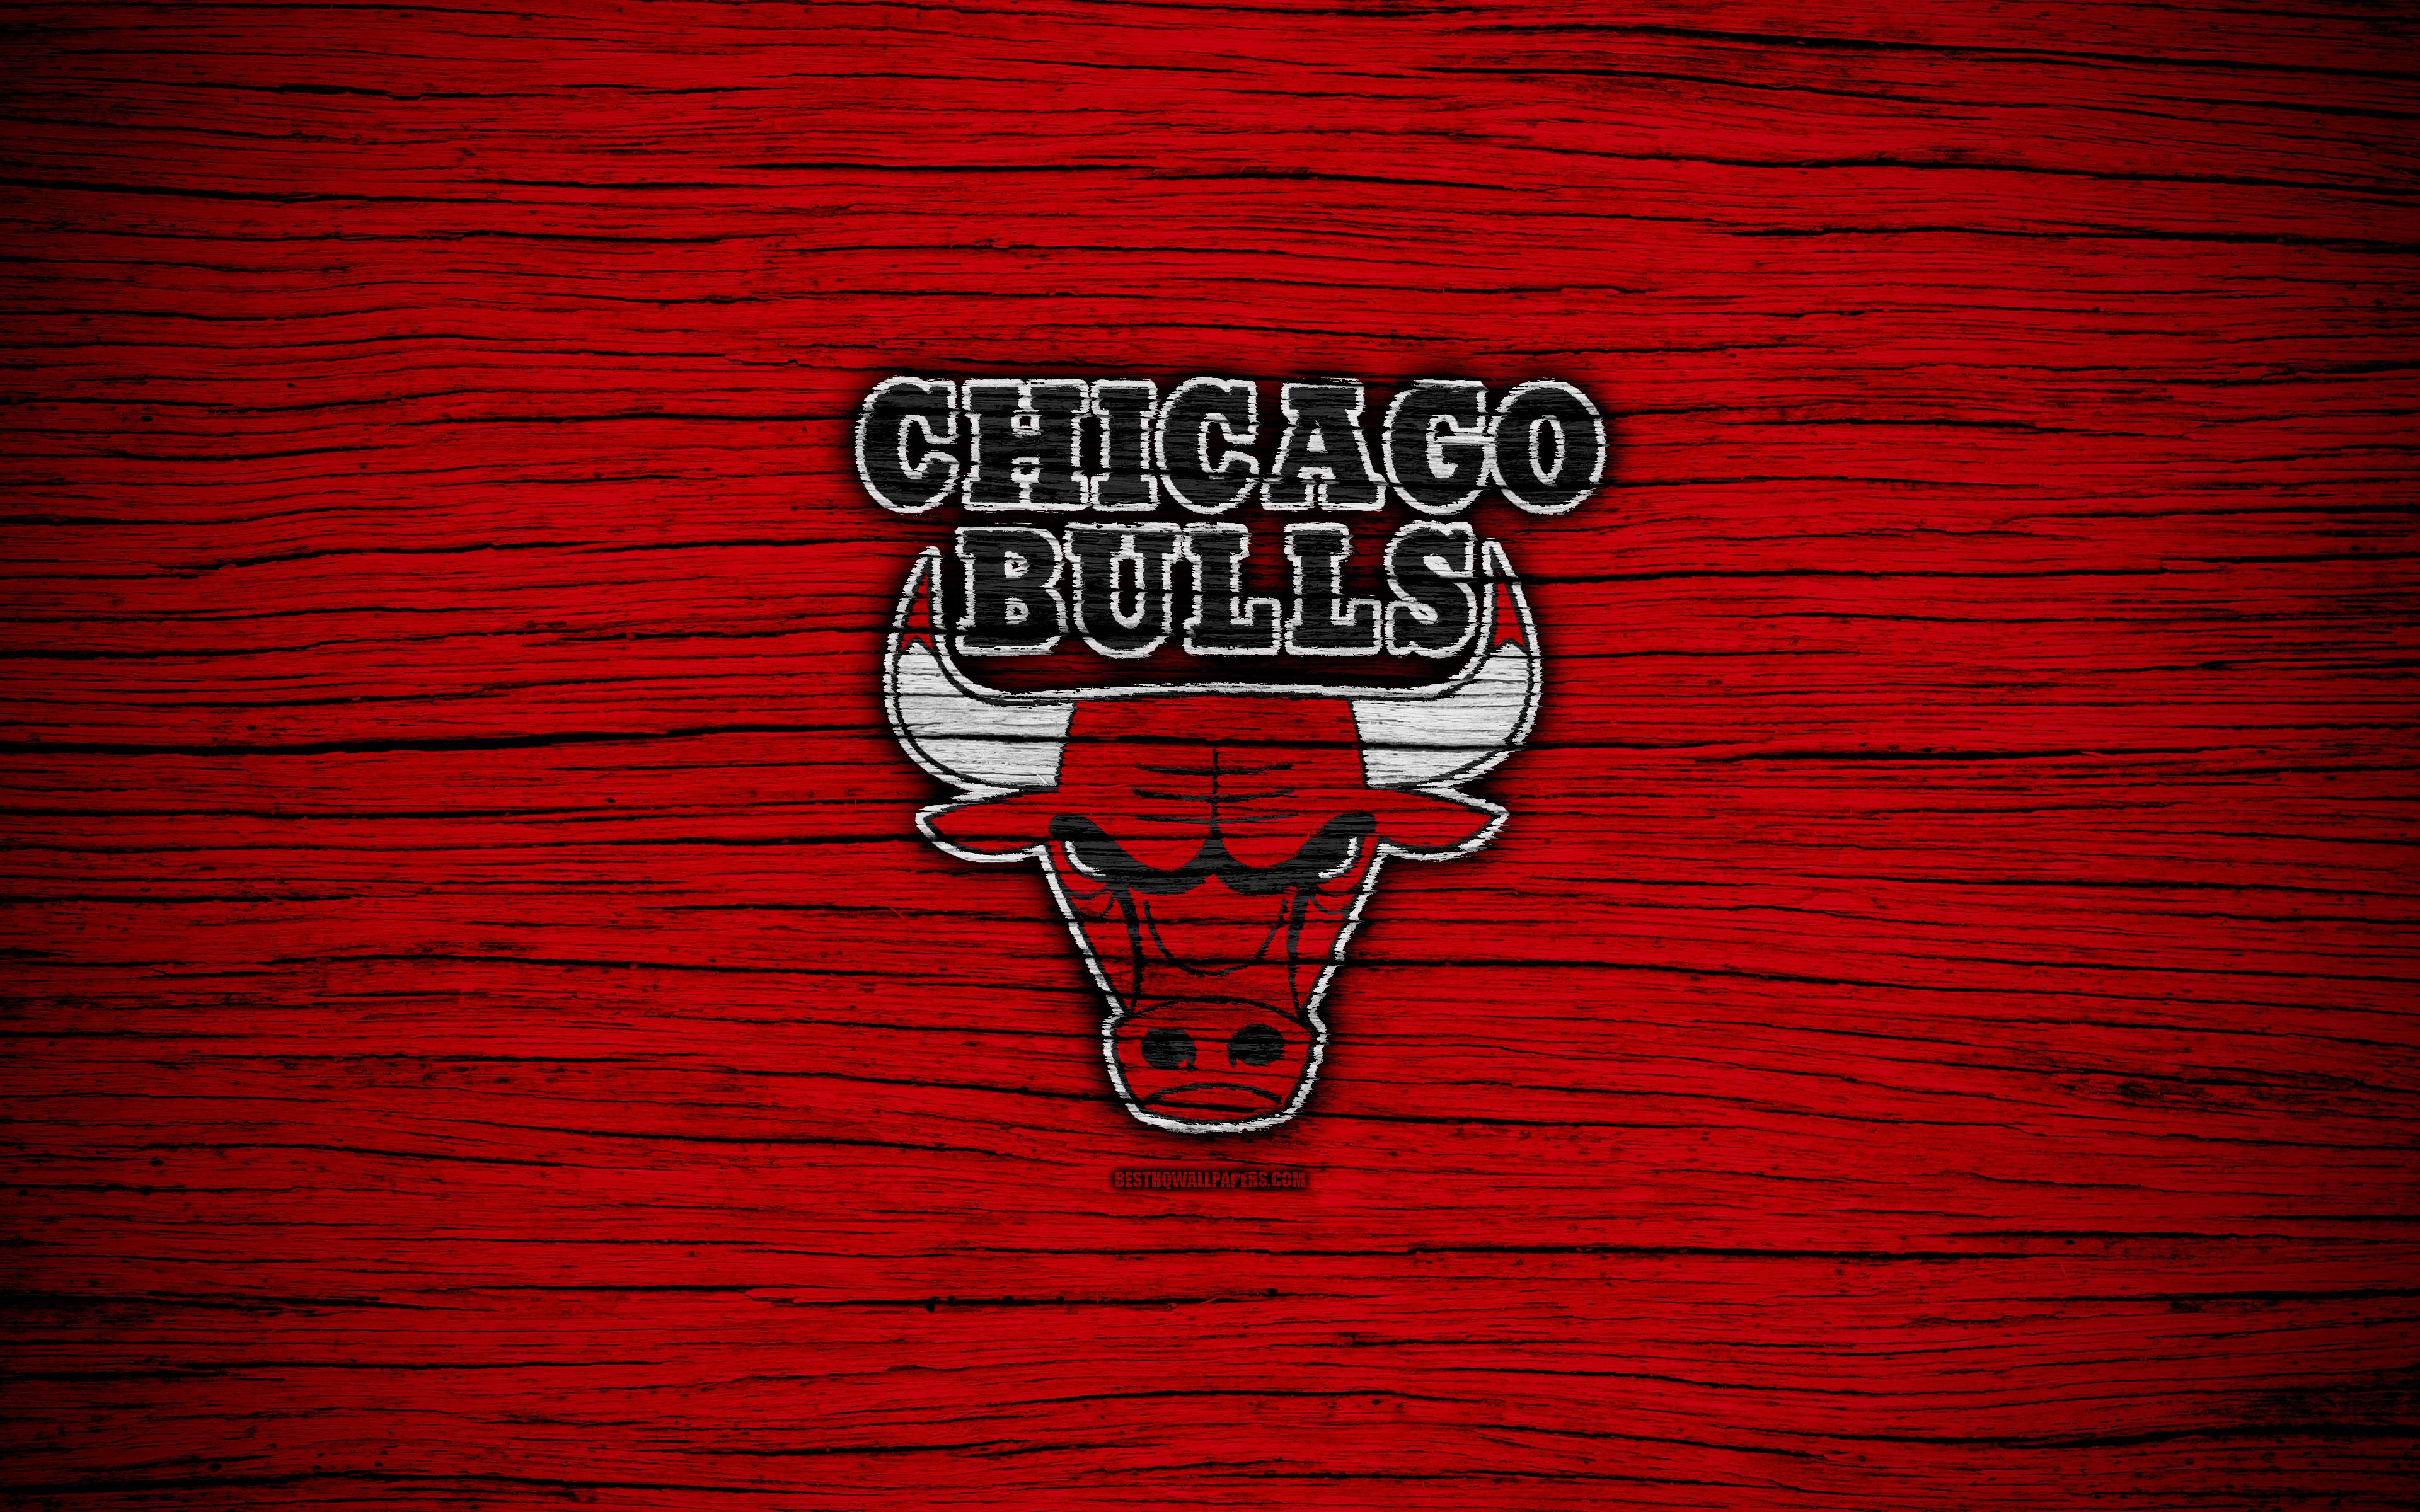 Download wallpaper 4k, Chicago Bulls, NBA, wooden texture, red background, basketball, Eastern Conference, USA, emblem, basketball club, Chicago Bulls logo for desktop with resolution 3840x2400. High Quality HD picture wallpaper